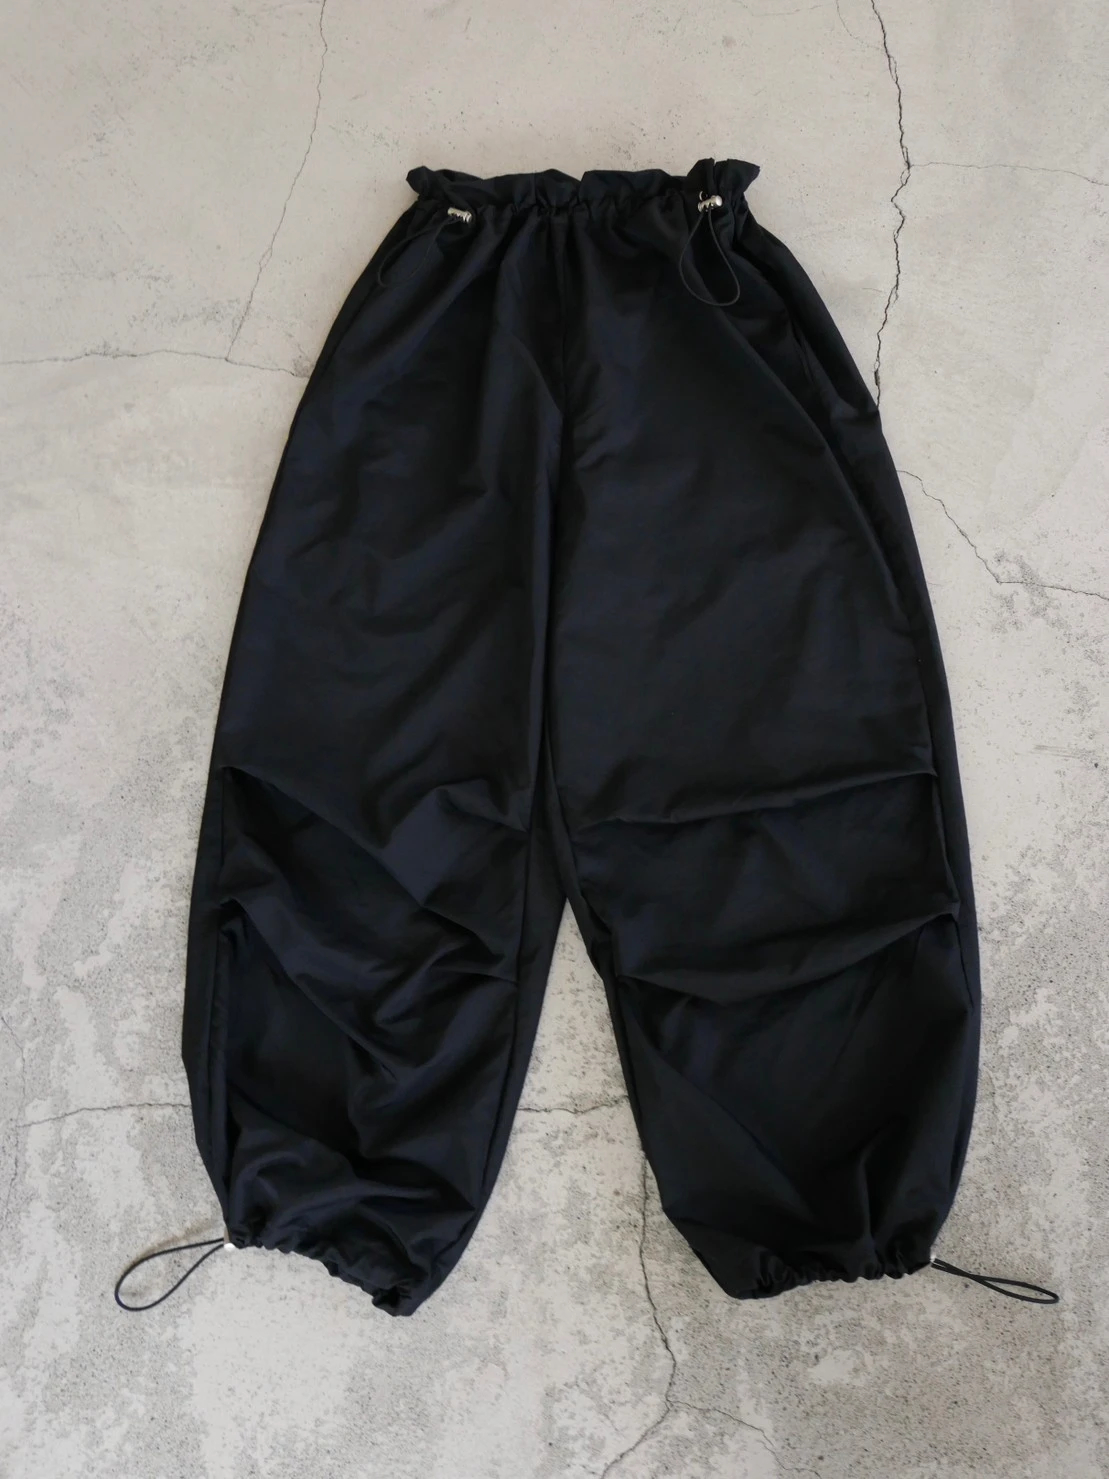 Countdown Black Classic Nylon Parachute Pants with Red Zippers